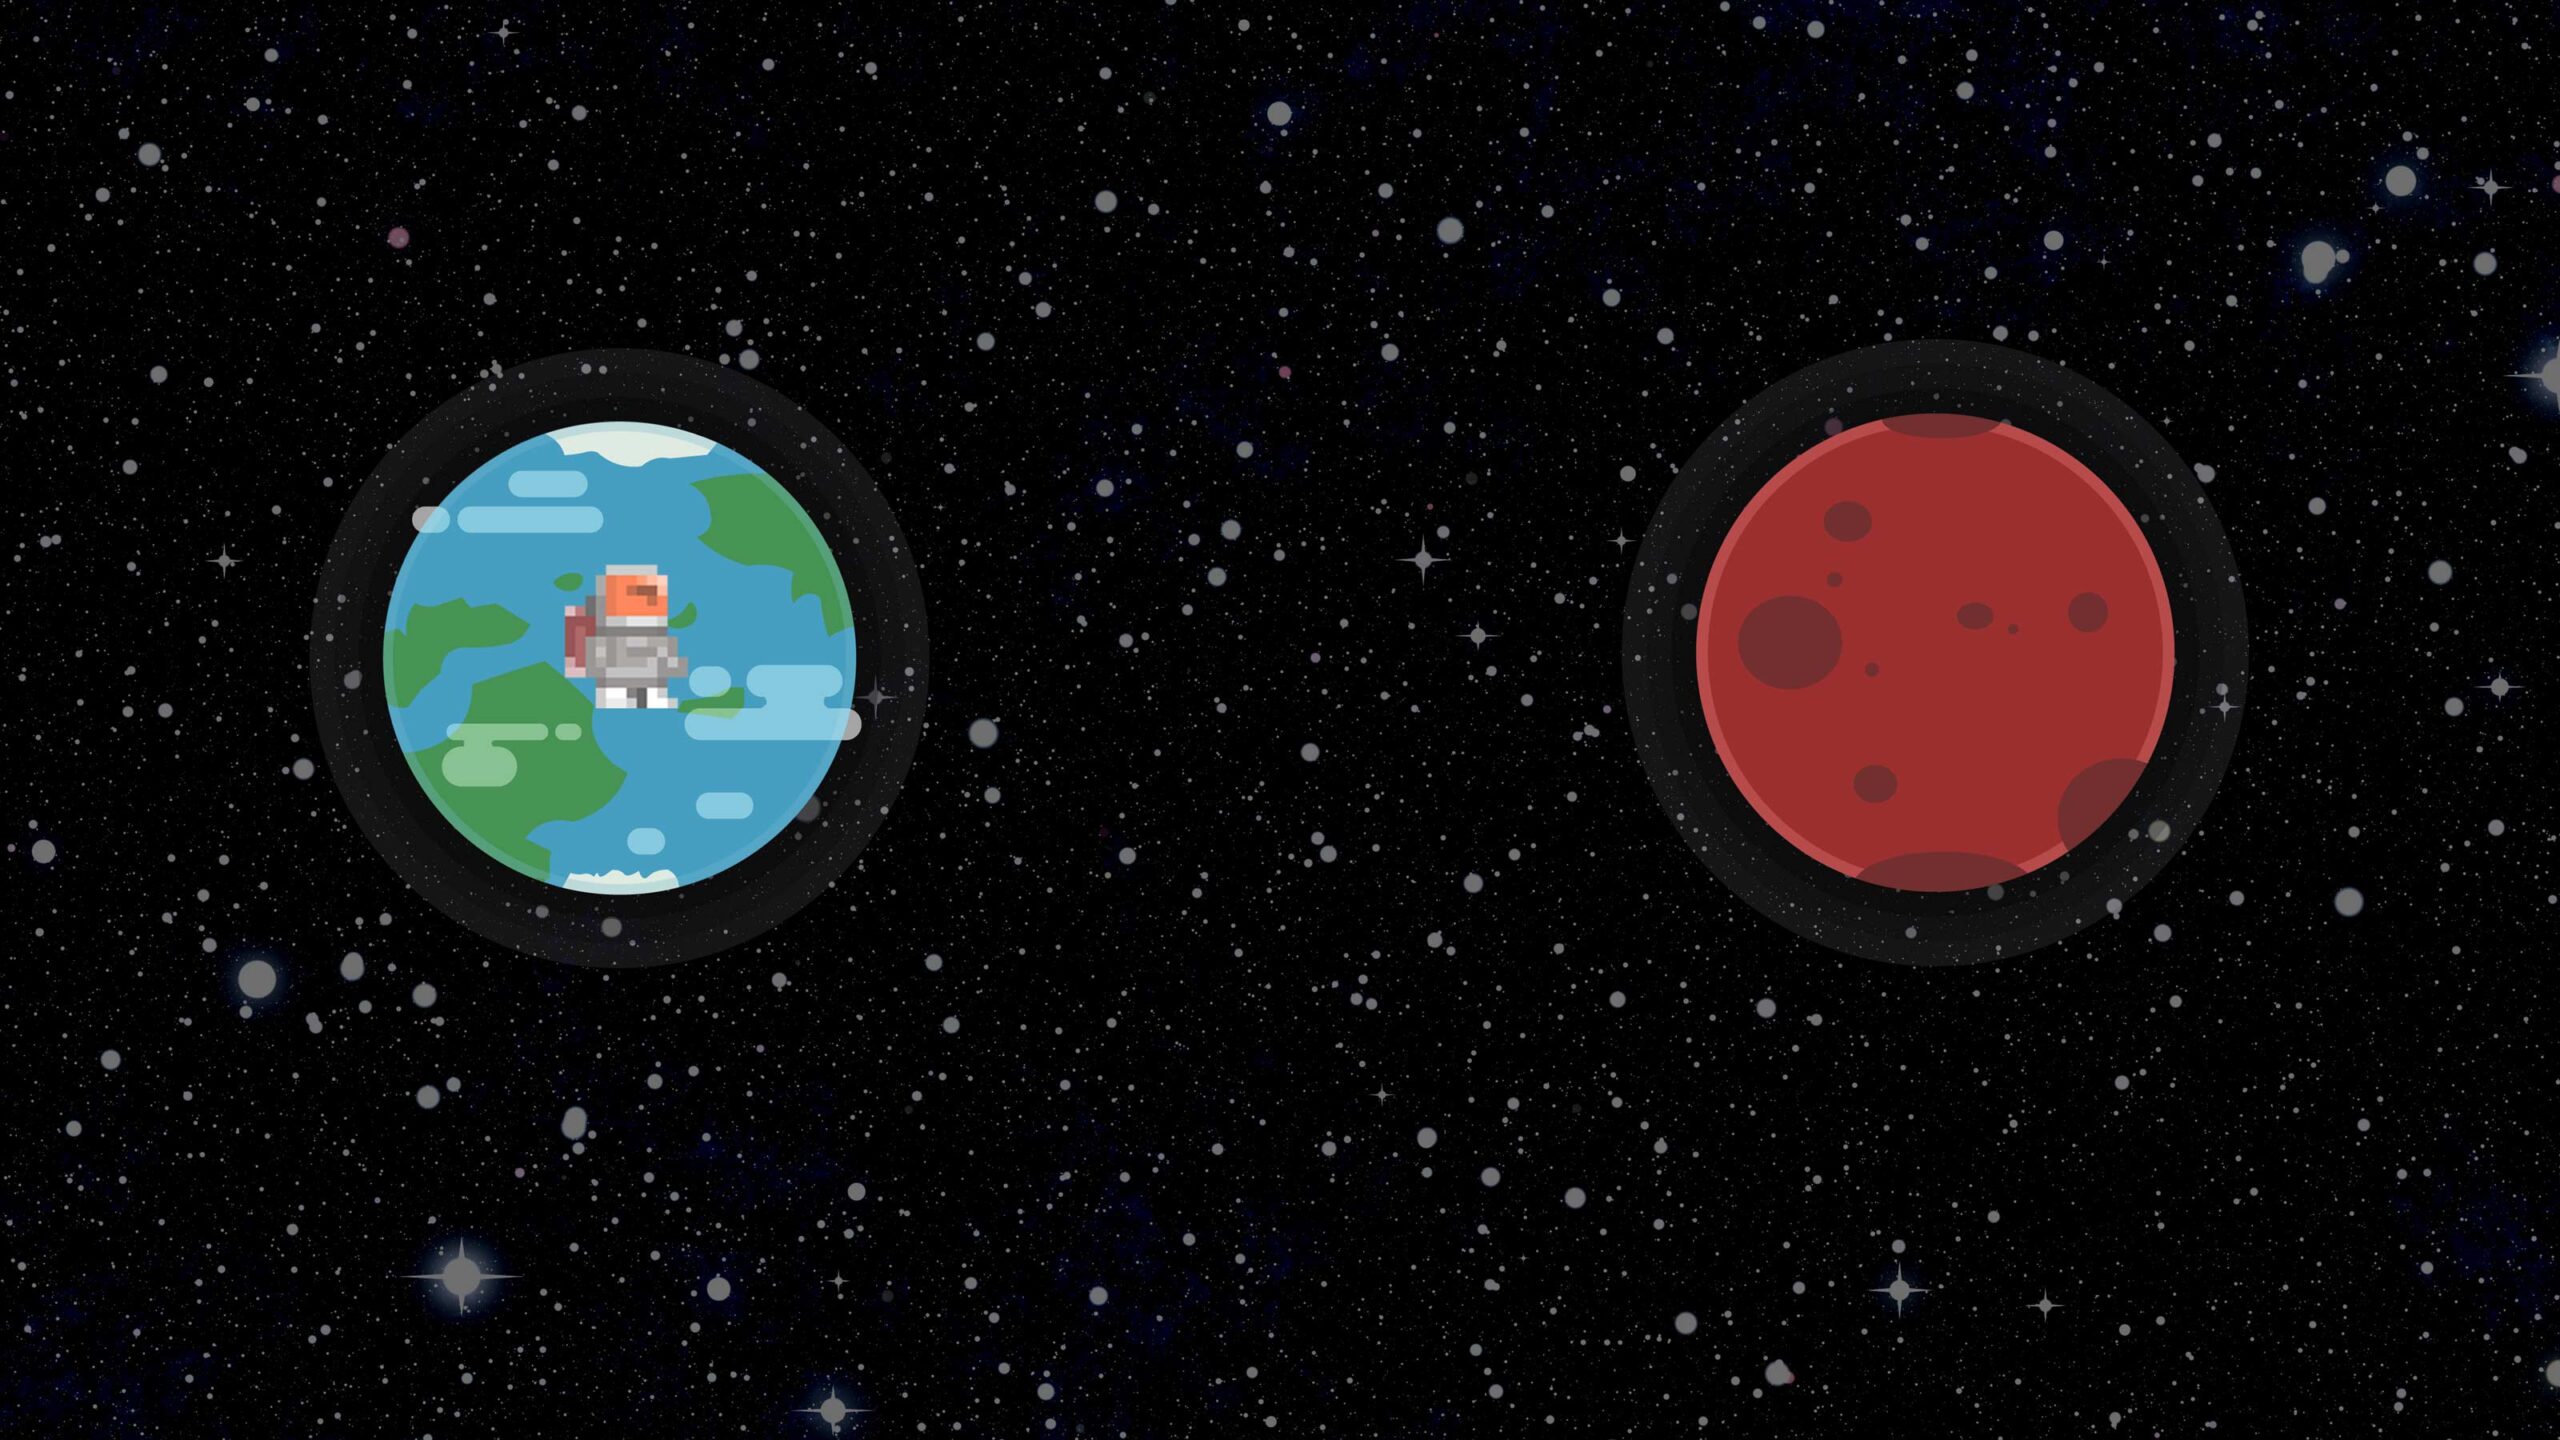 A graphic of a pixel-art astronaut on an Earth-like planet and a red planet on a starry background.